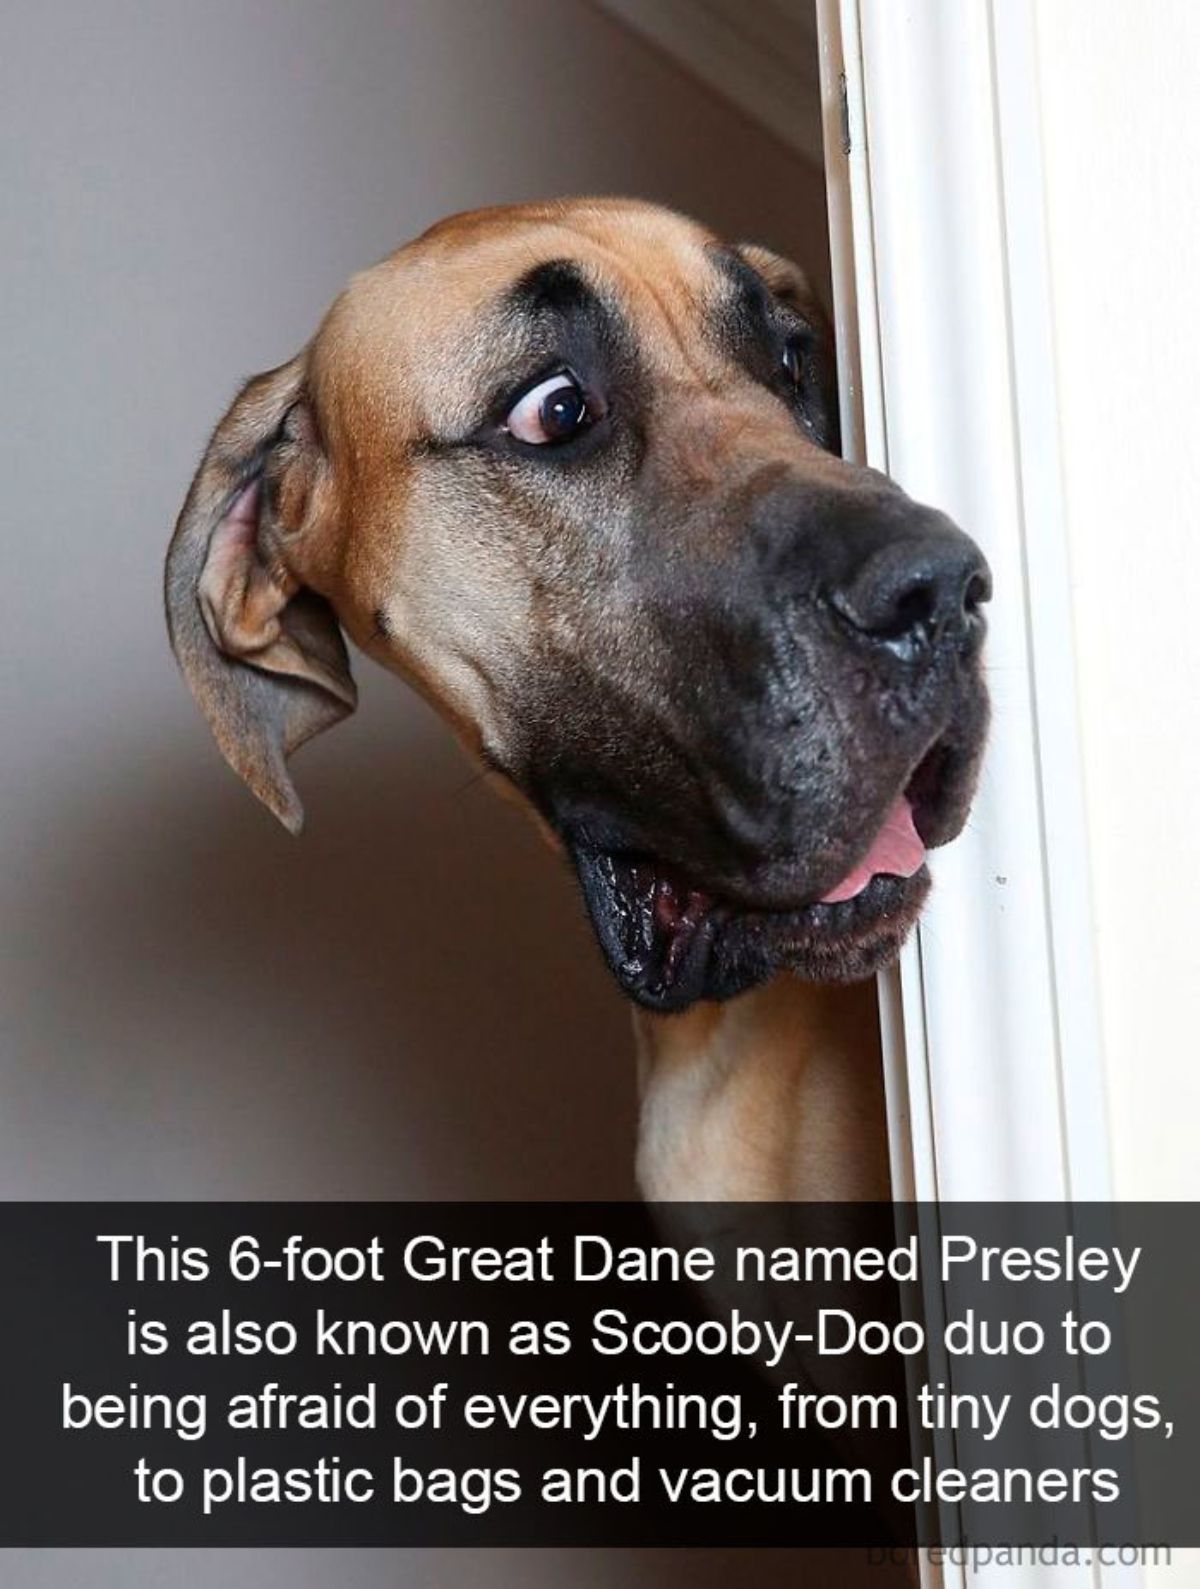 brown great dane looking around a white door with its mouth and eyes open with a caption saying this 6-foot great dane named Presley is also known as Scooby-Doo due to being afraid of everything, from tiny dogs, to plastic bags and vacuum cleaners